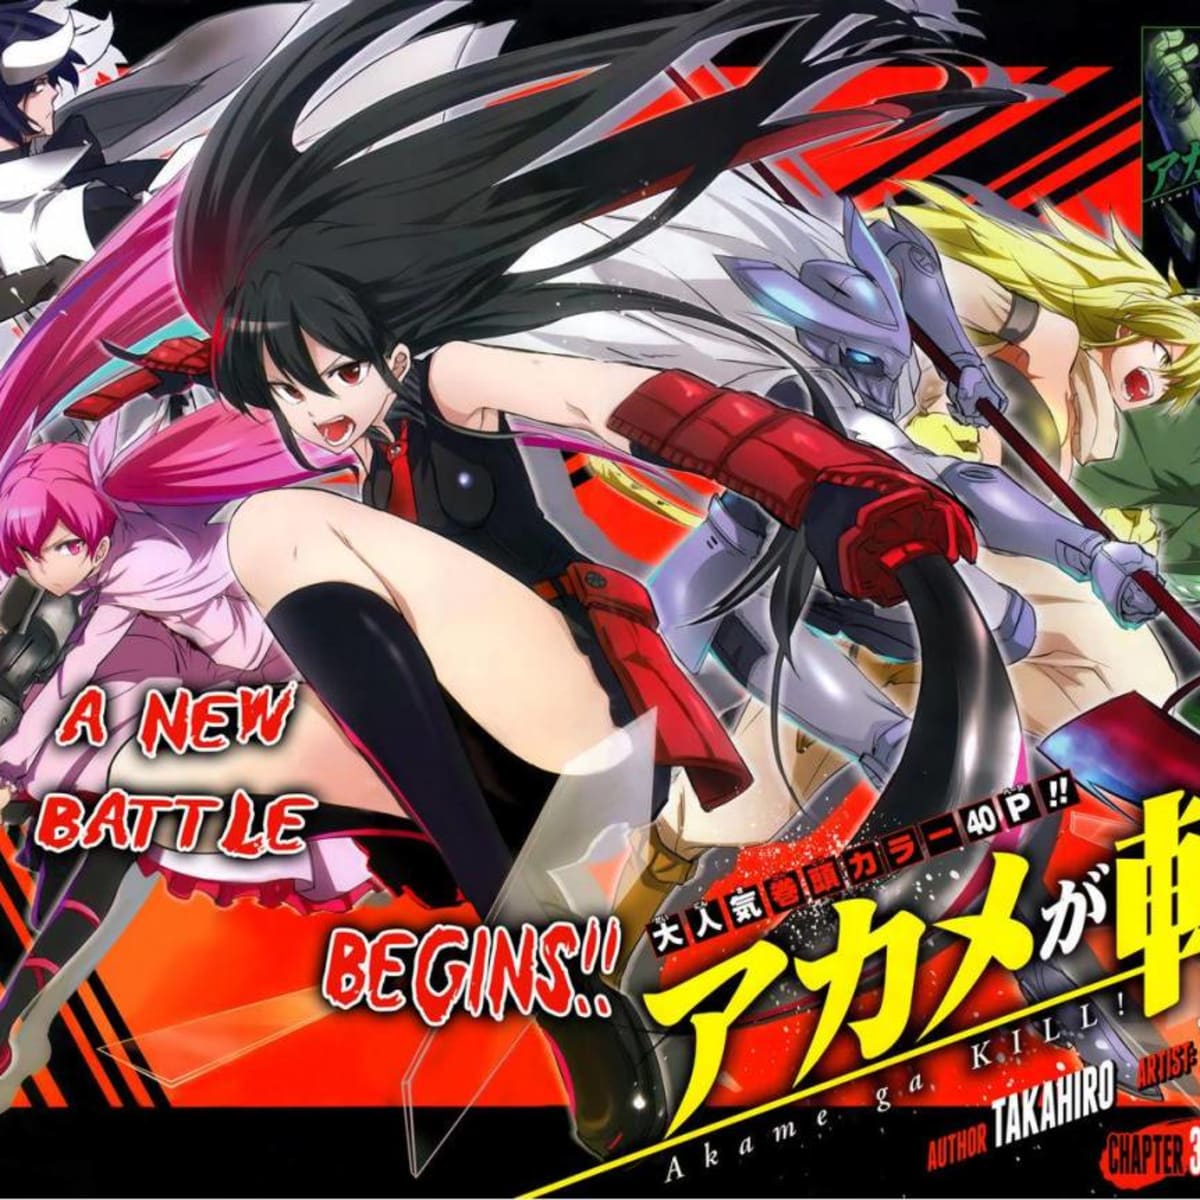 How is Akame Ga Kill Zero different from the main storyline?